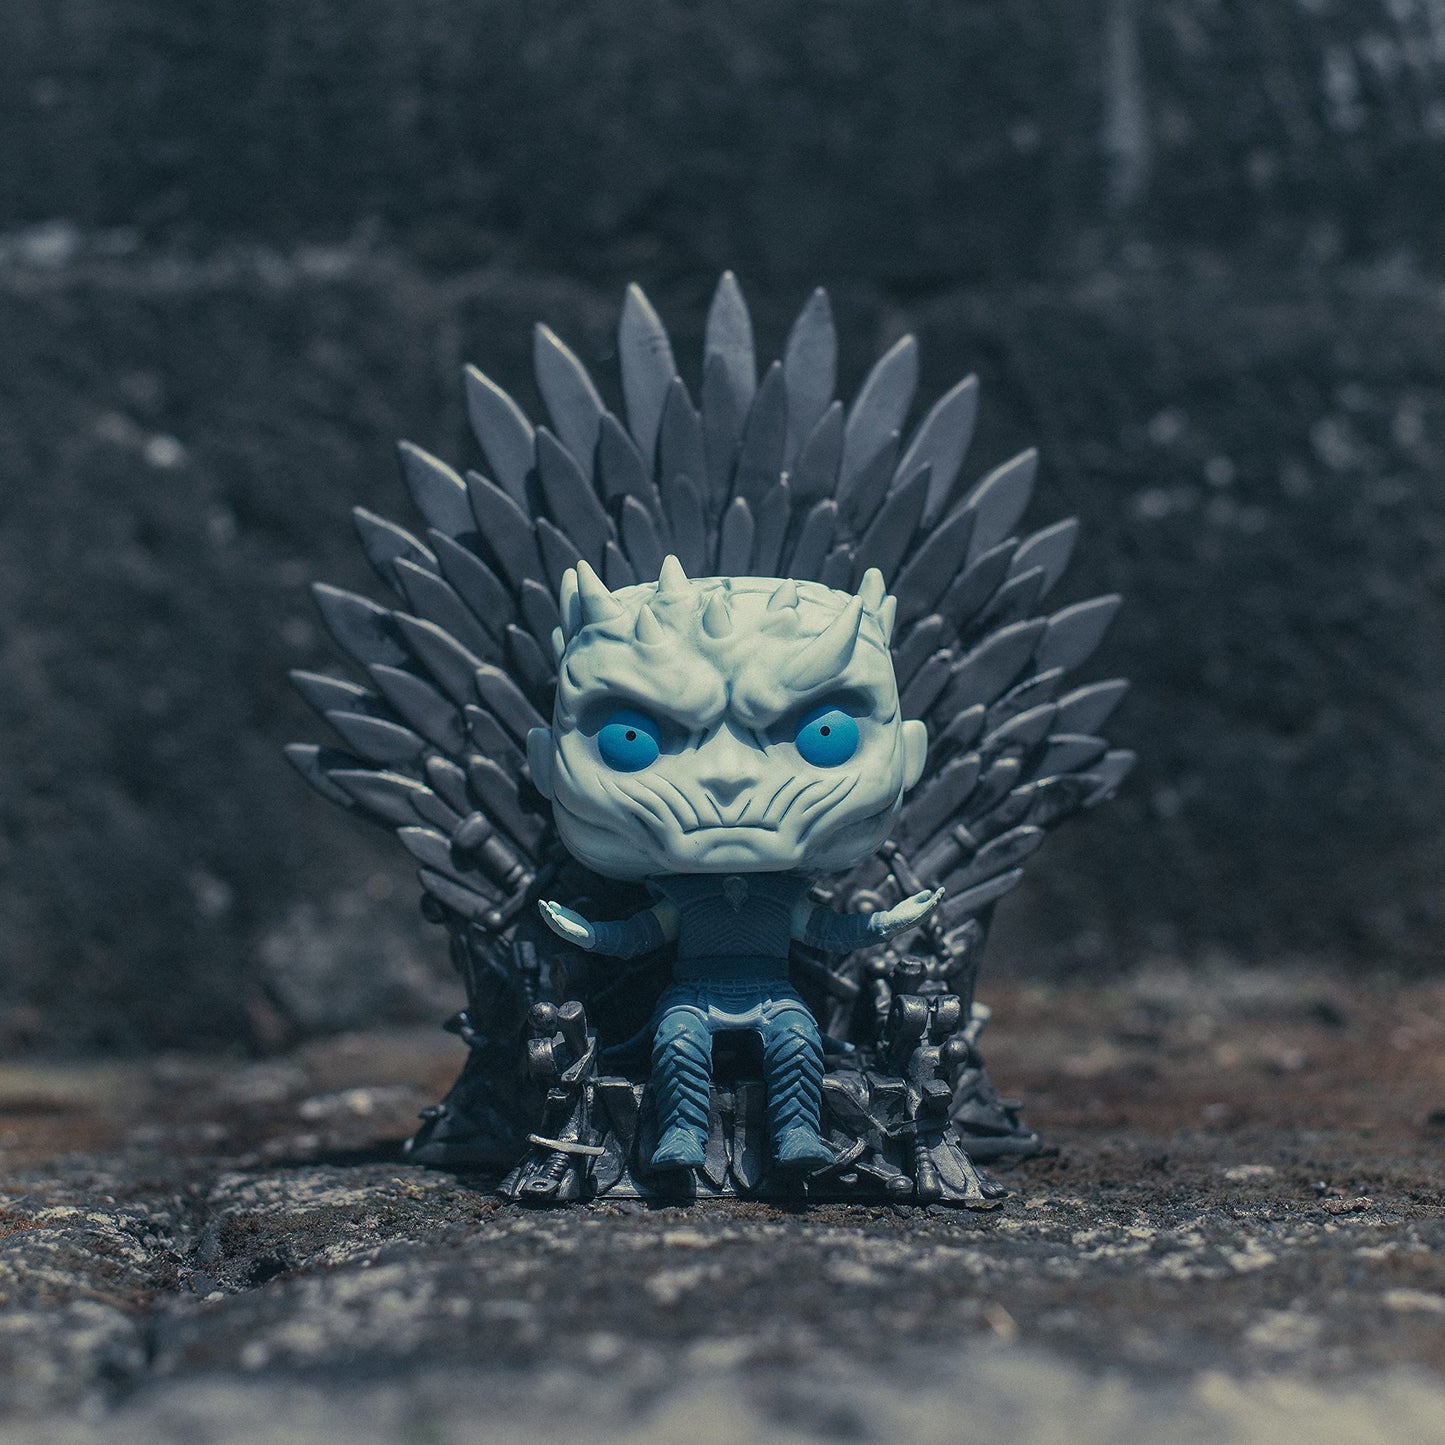 Funko Fgr-POP Deluxe Game of Thrones, Night King on Throne (37794)